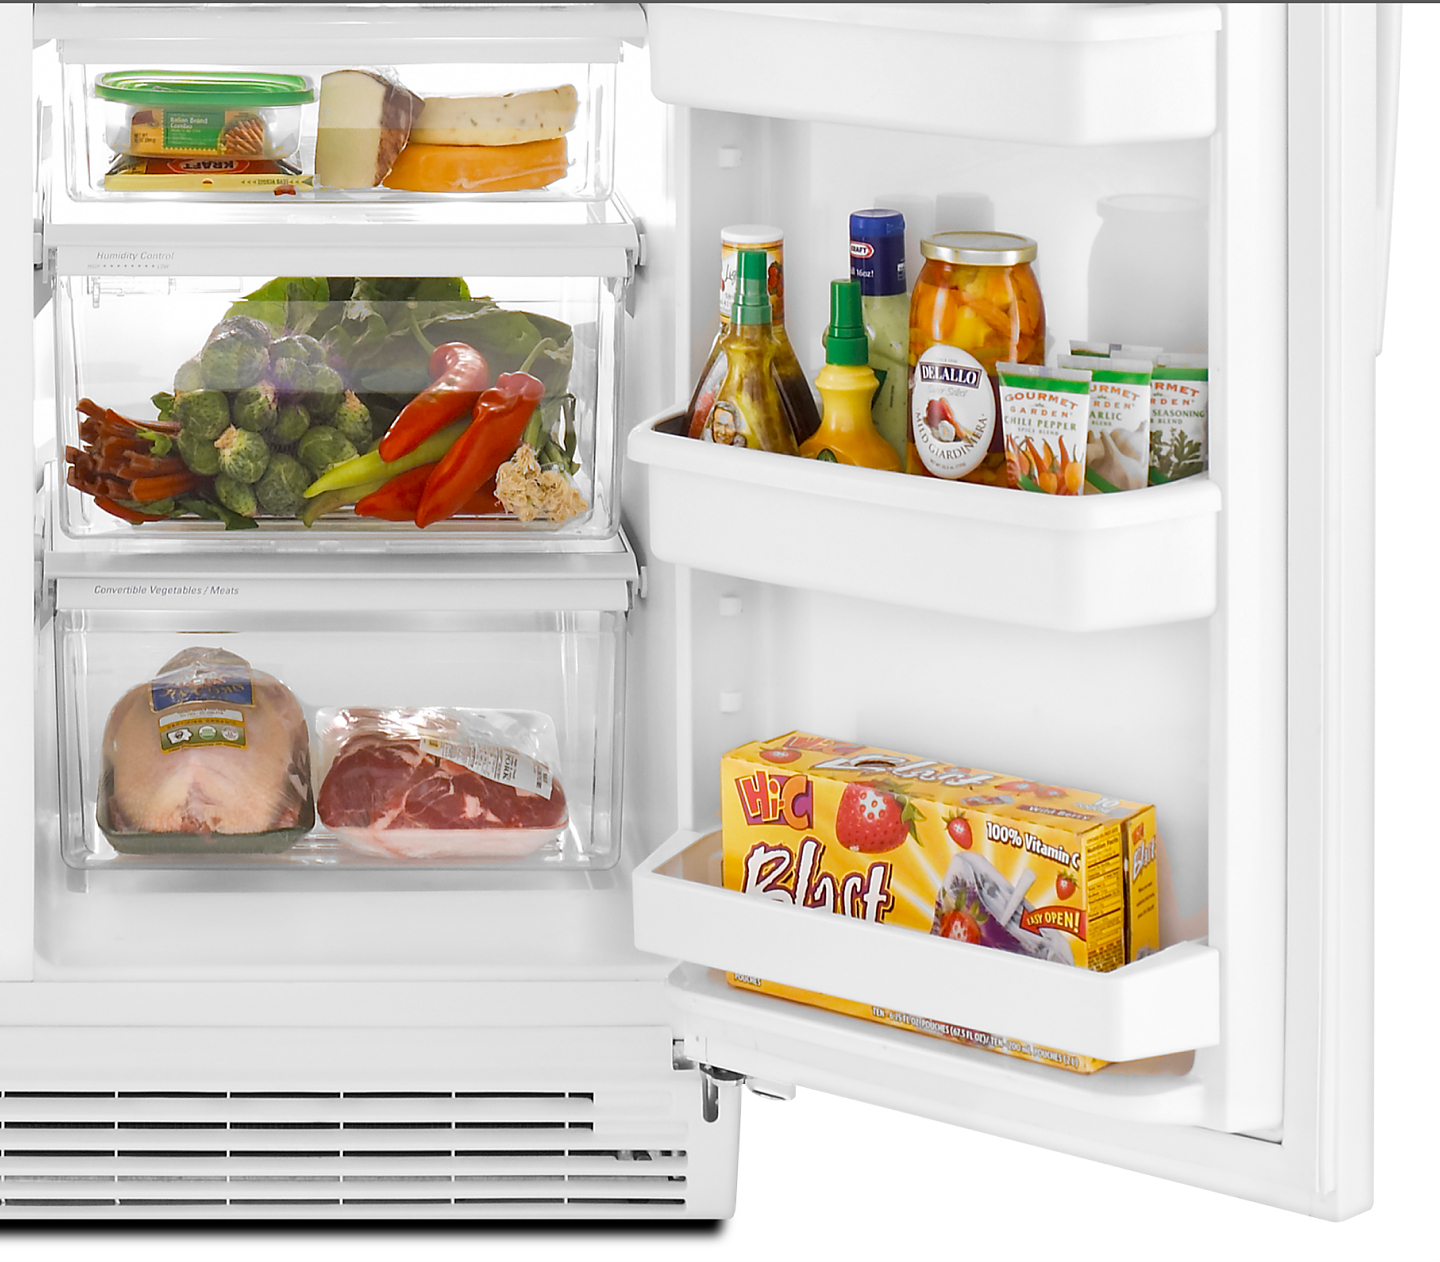 Inside view of refrigerator with food